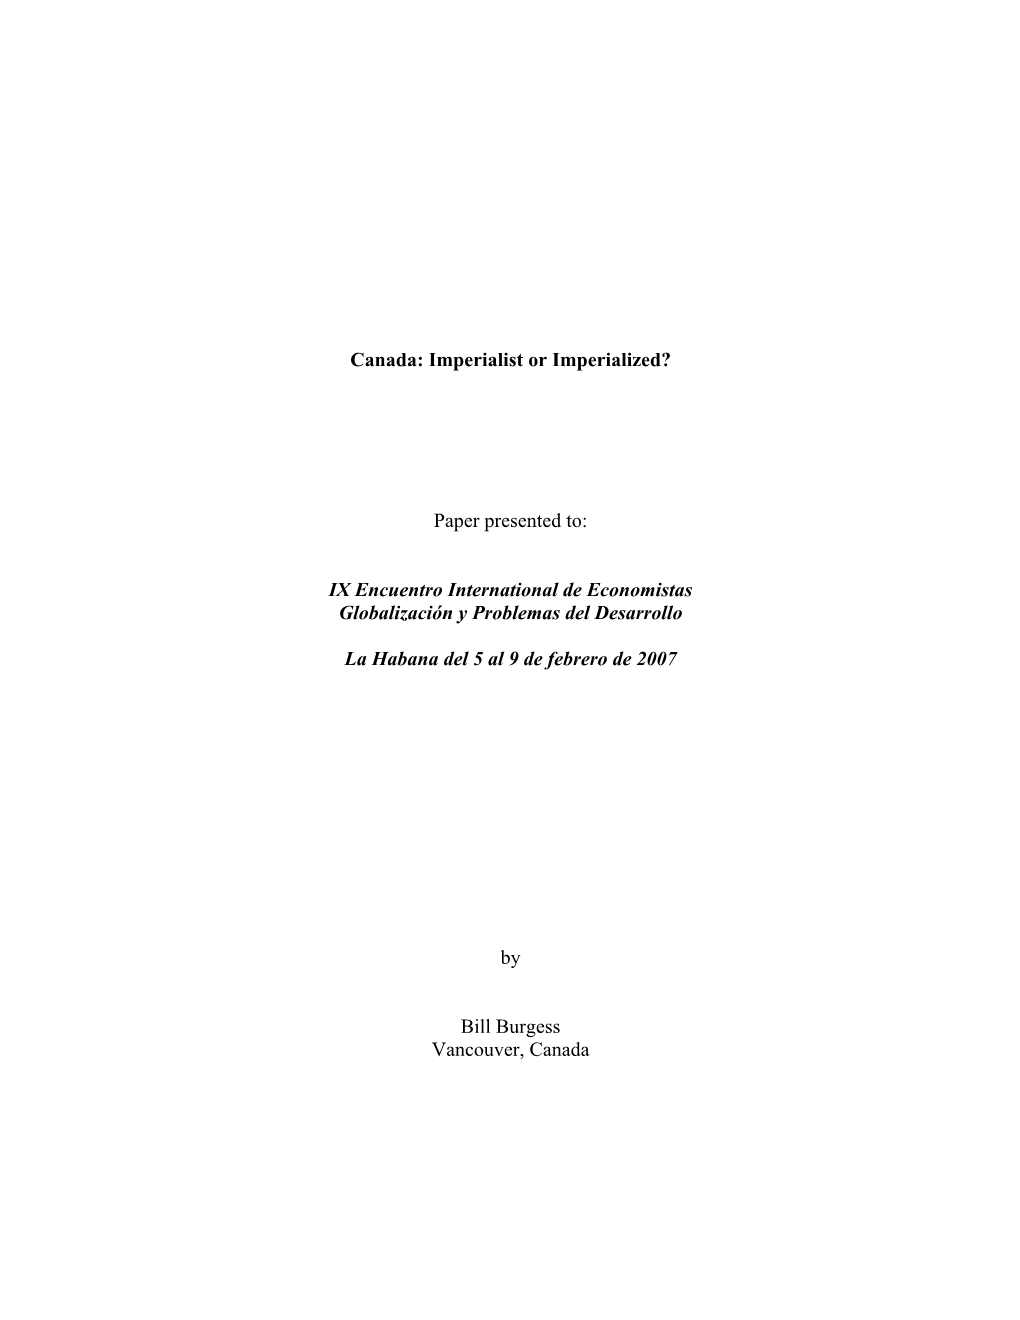 Canada: Imperialist Or Imperialized? Paper Presented To: IX Encuentro